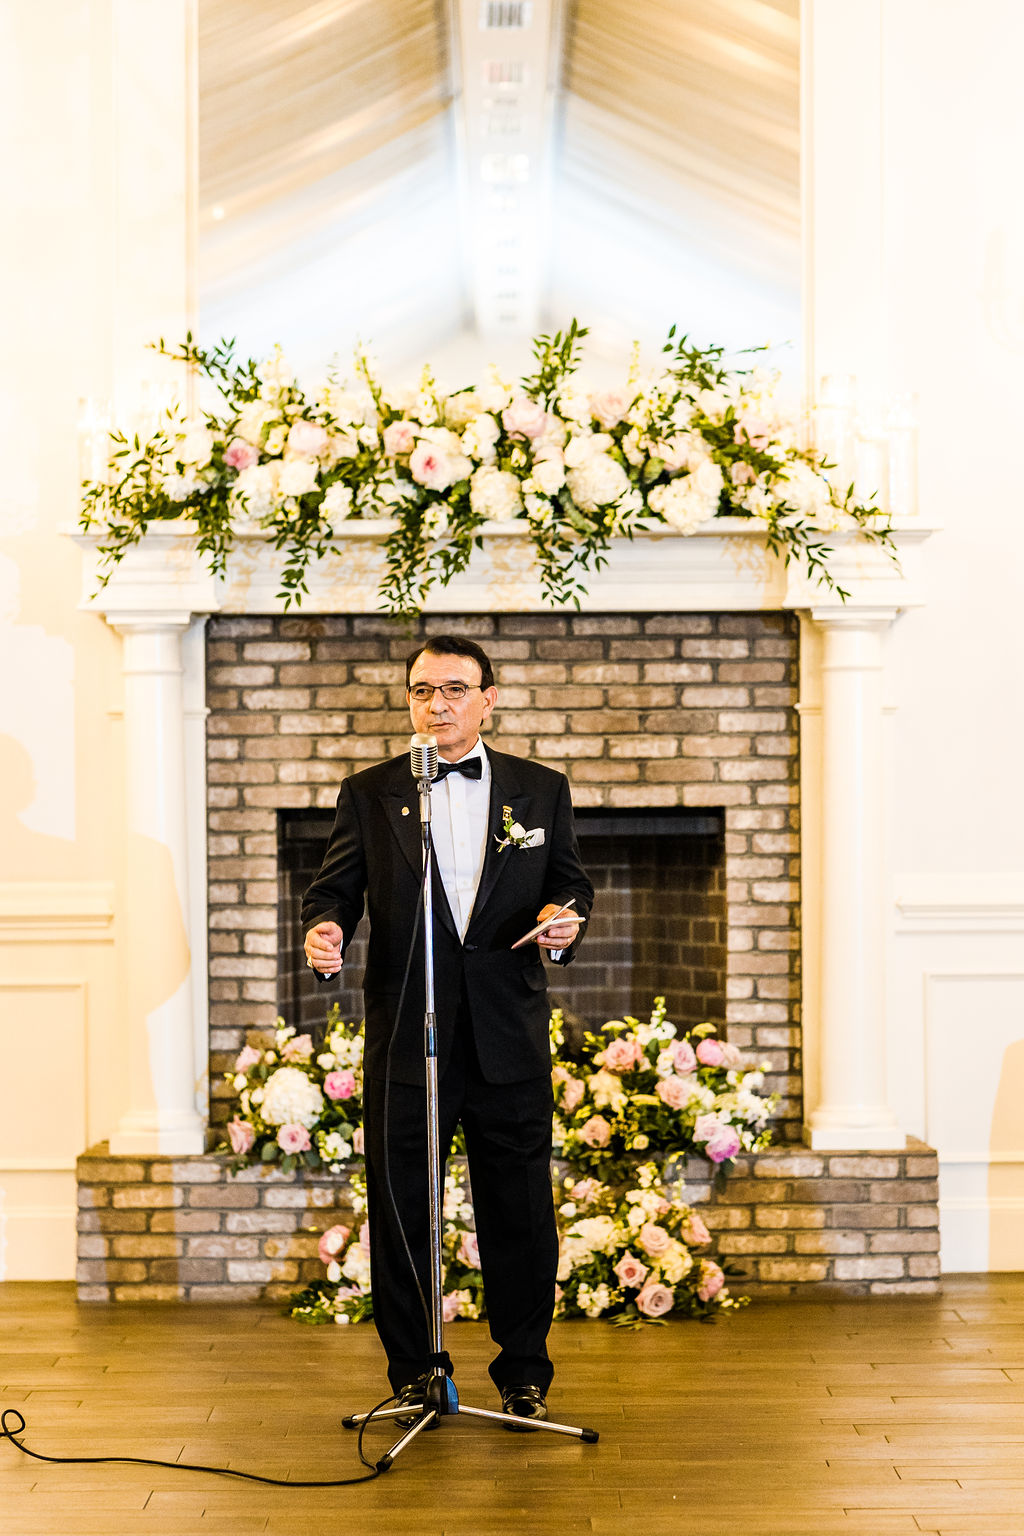 Dreamy Wedding Venues in Cary, Apex and Fuquay-Varina, NC